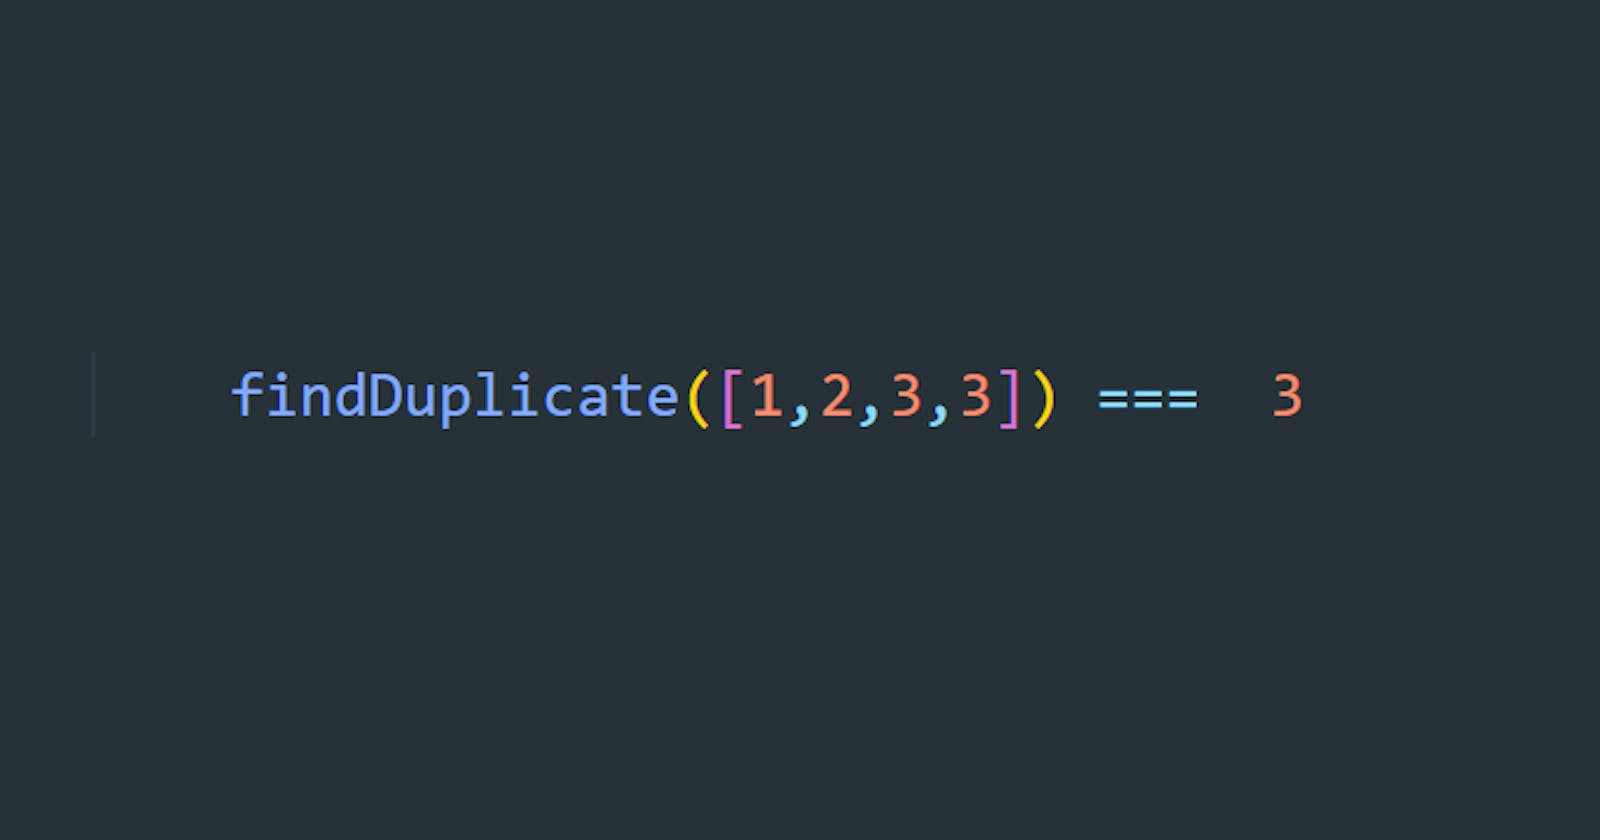 What Number is Duplicated in the Array?